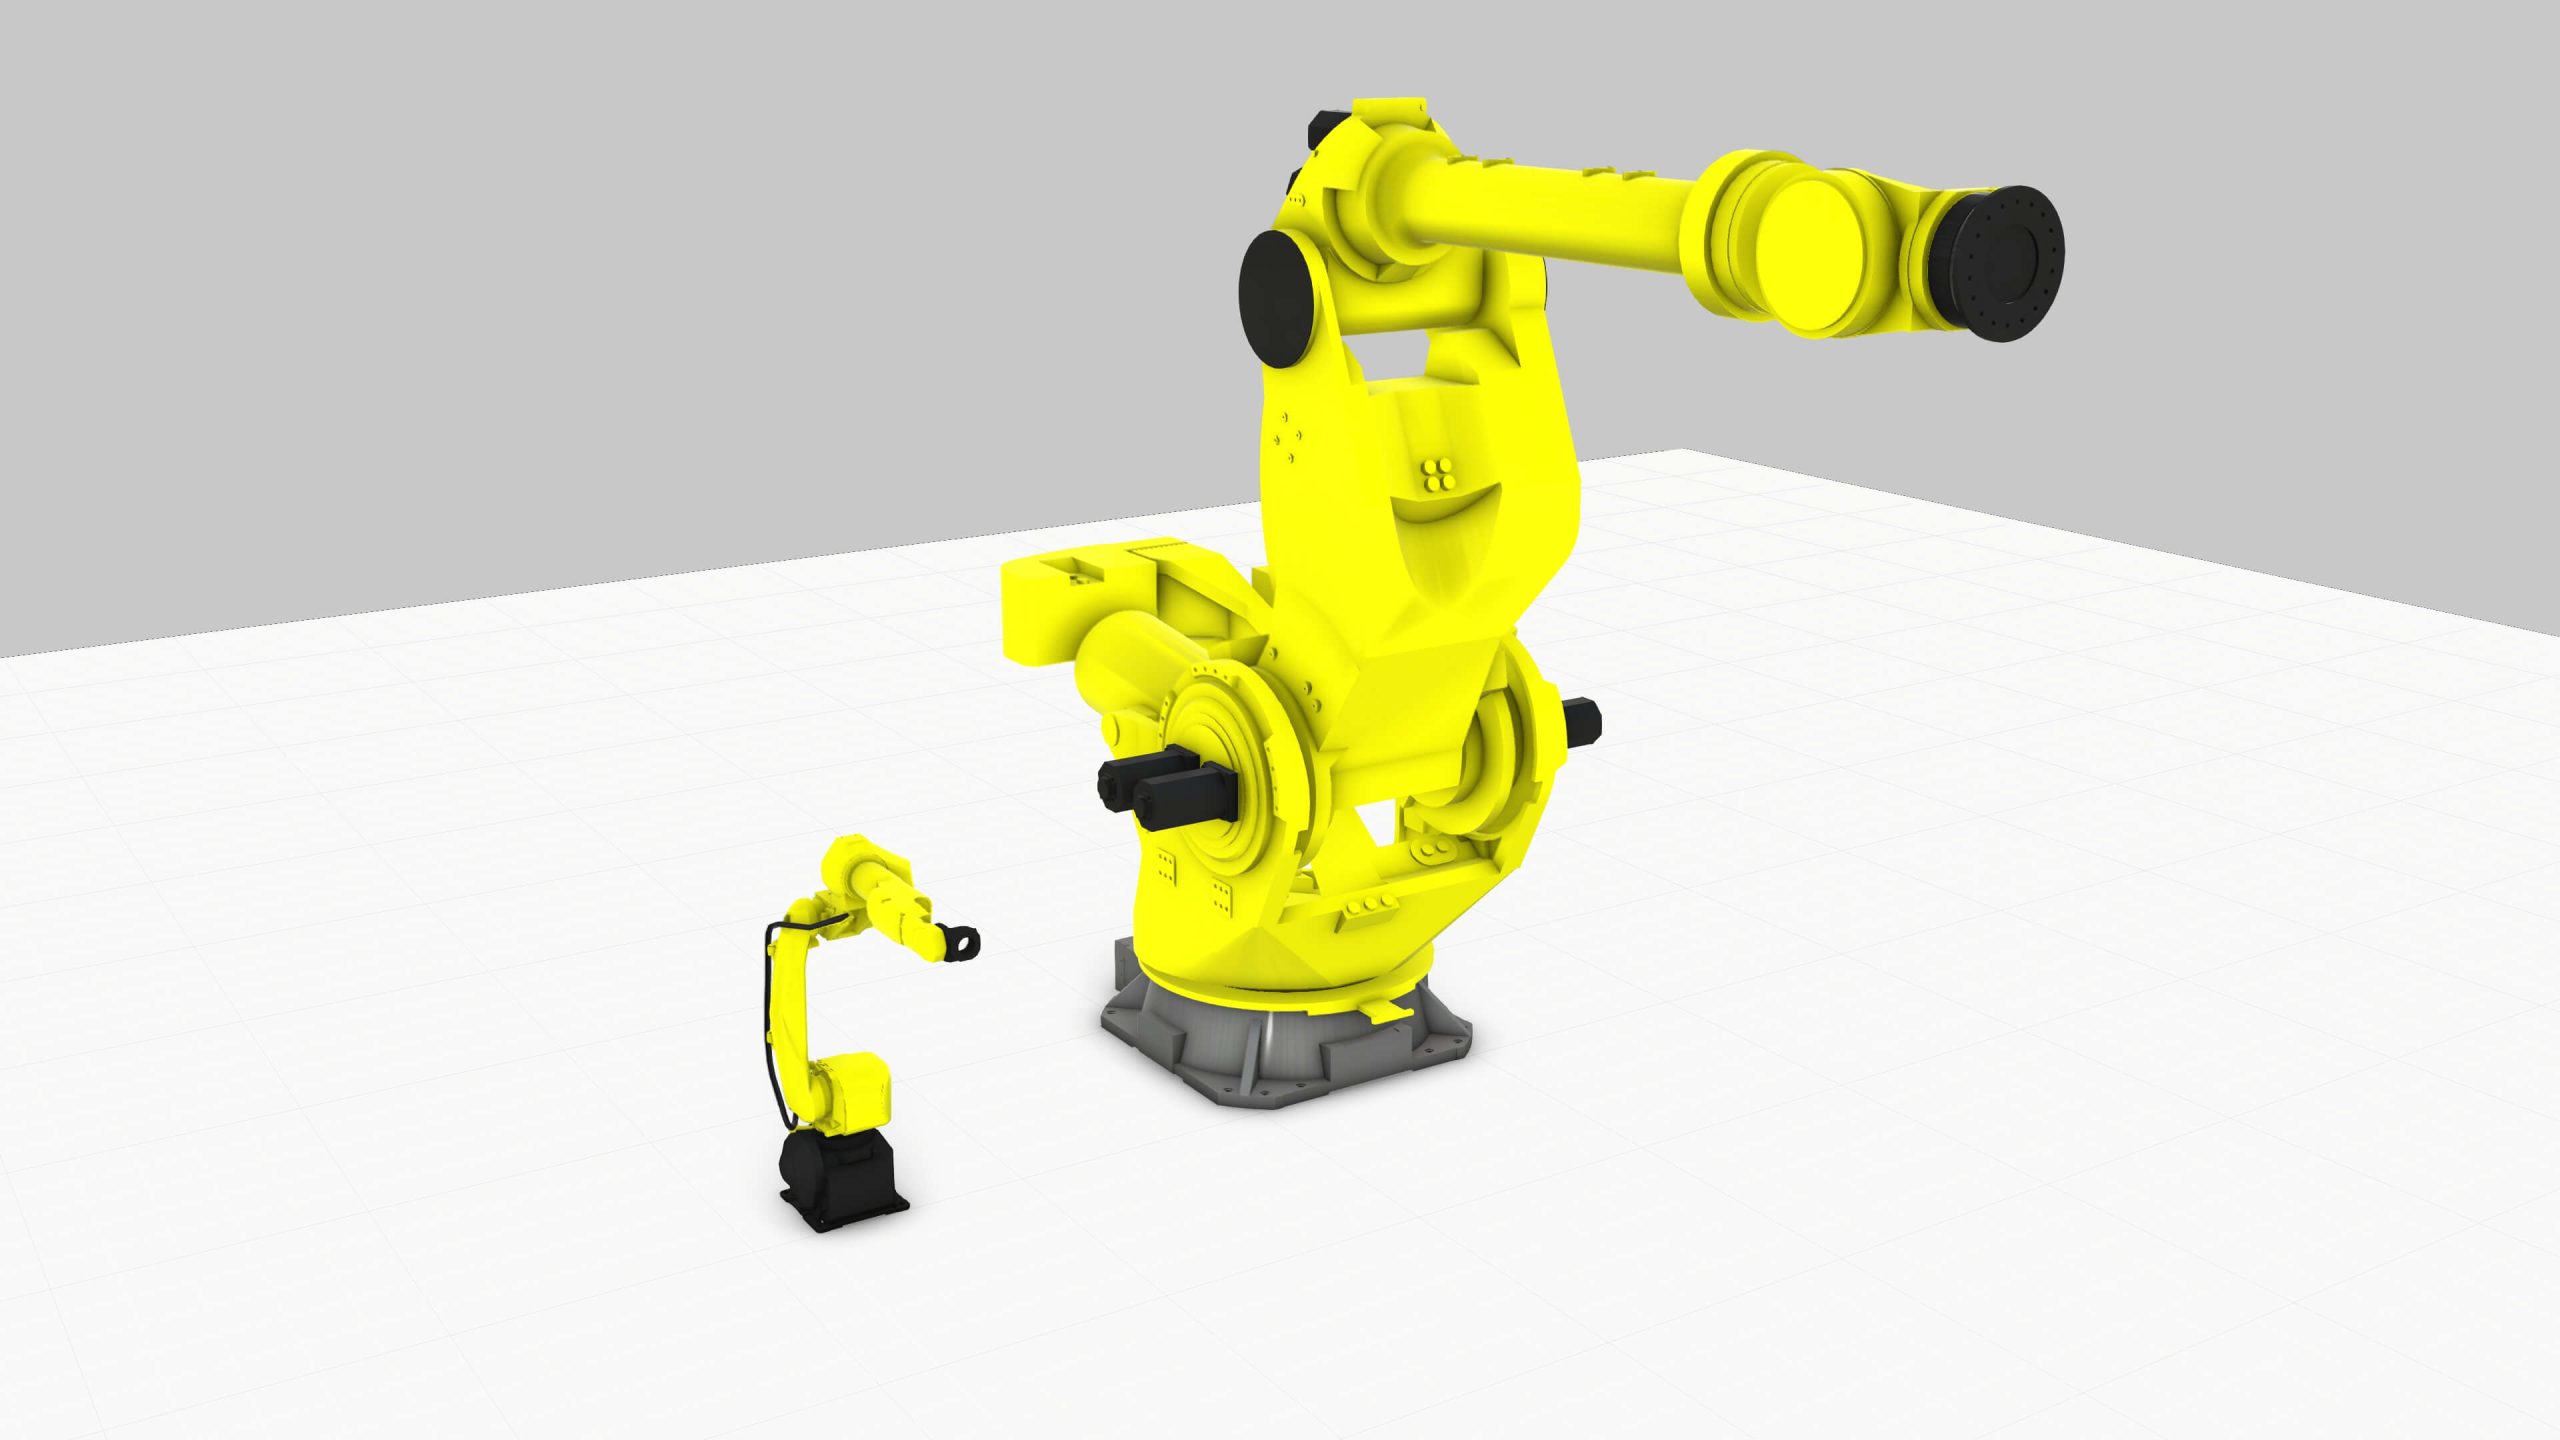 The new Fanuc component additions to Visual Components eCatalog in August 2018